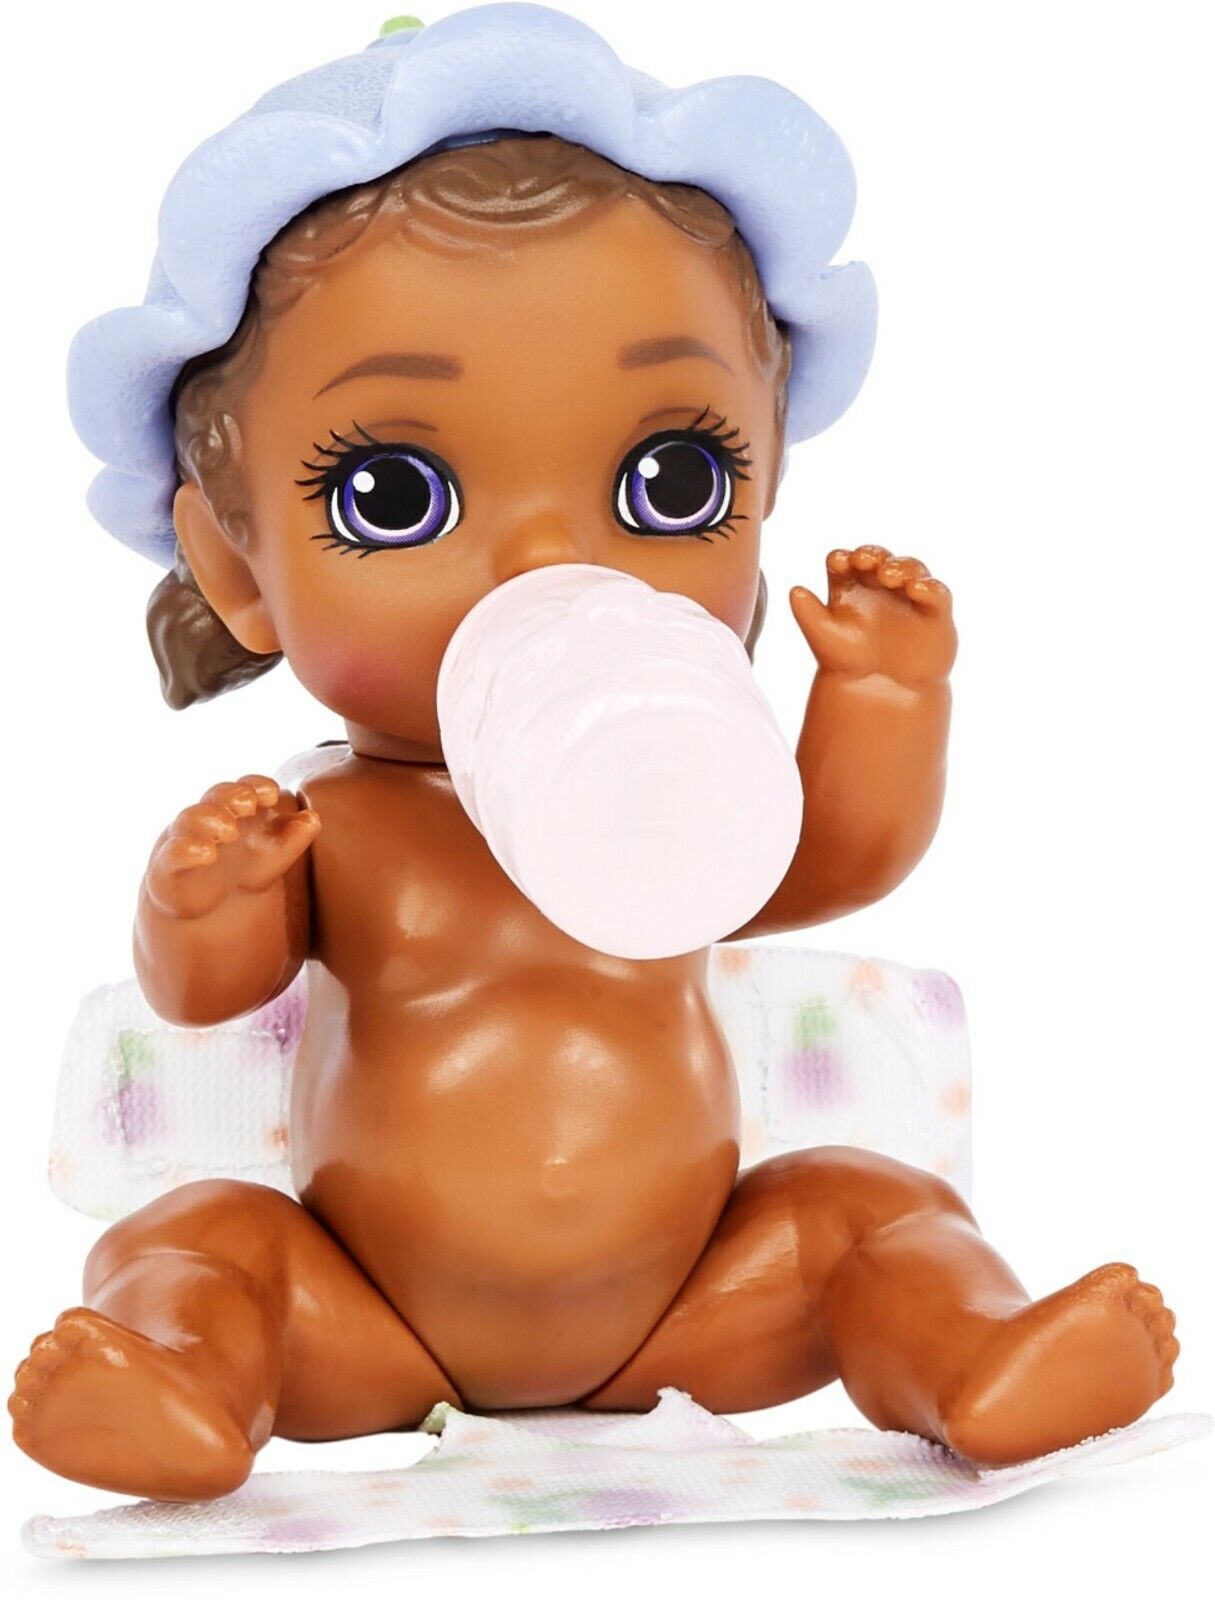 Baby Born Surprise Series 3 Blooming Babies Mystery Pack NEW. MGA Entertainment 917271 - фотография #12